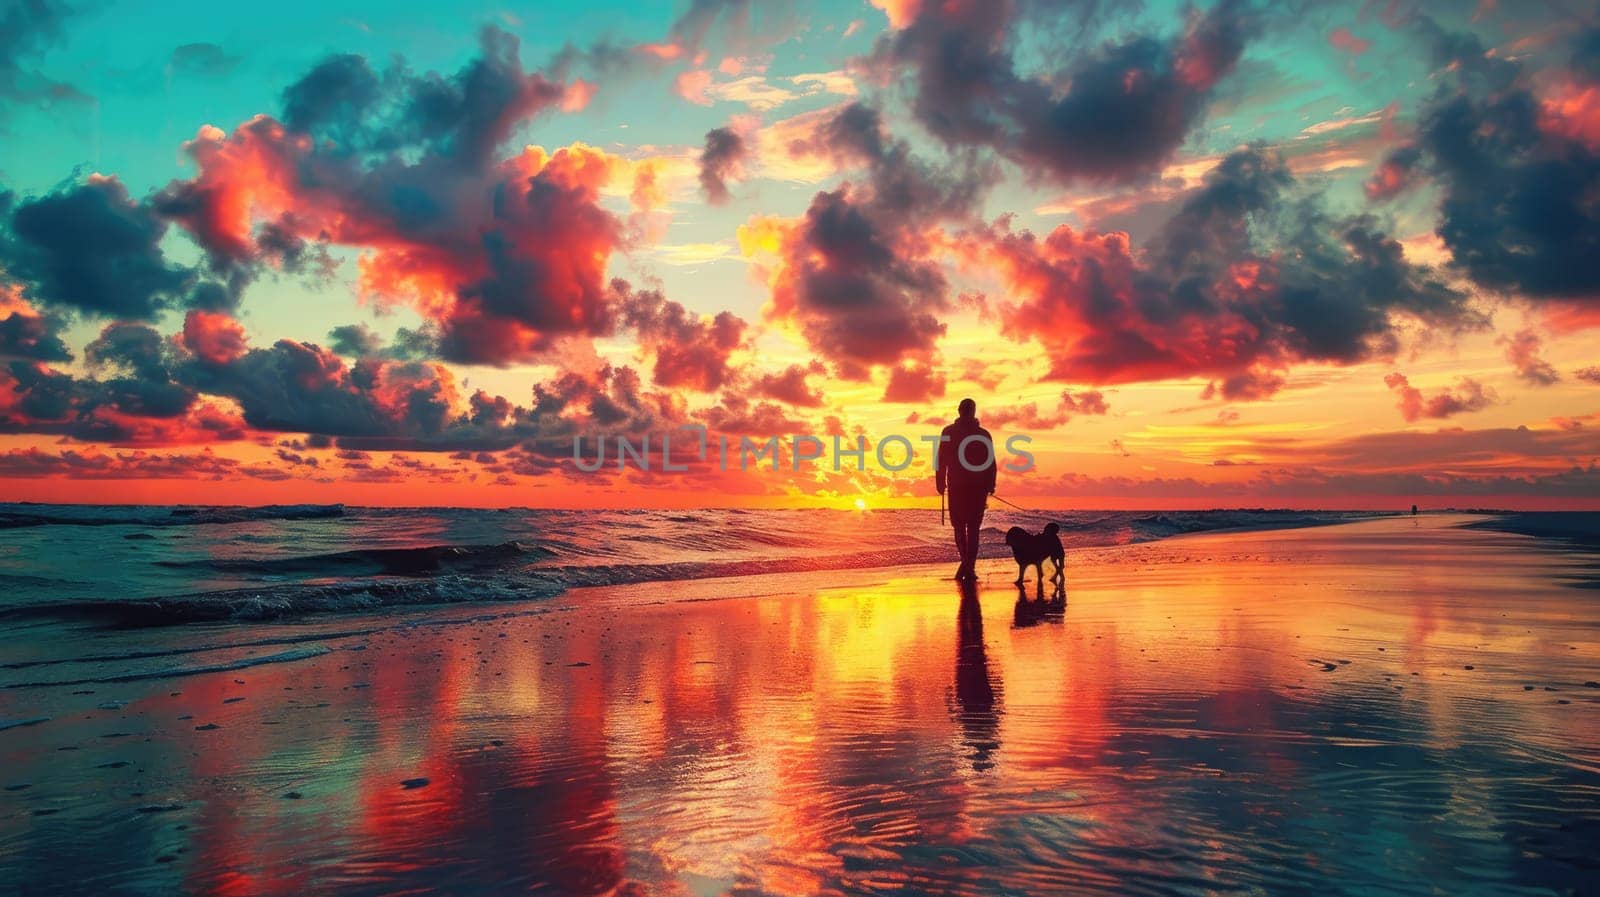 A person walking their dog along a beach at sunset, both silhouetted against the colorful sky.